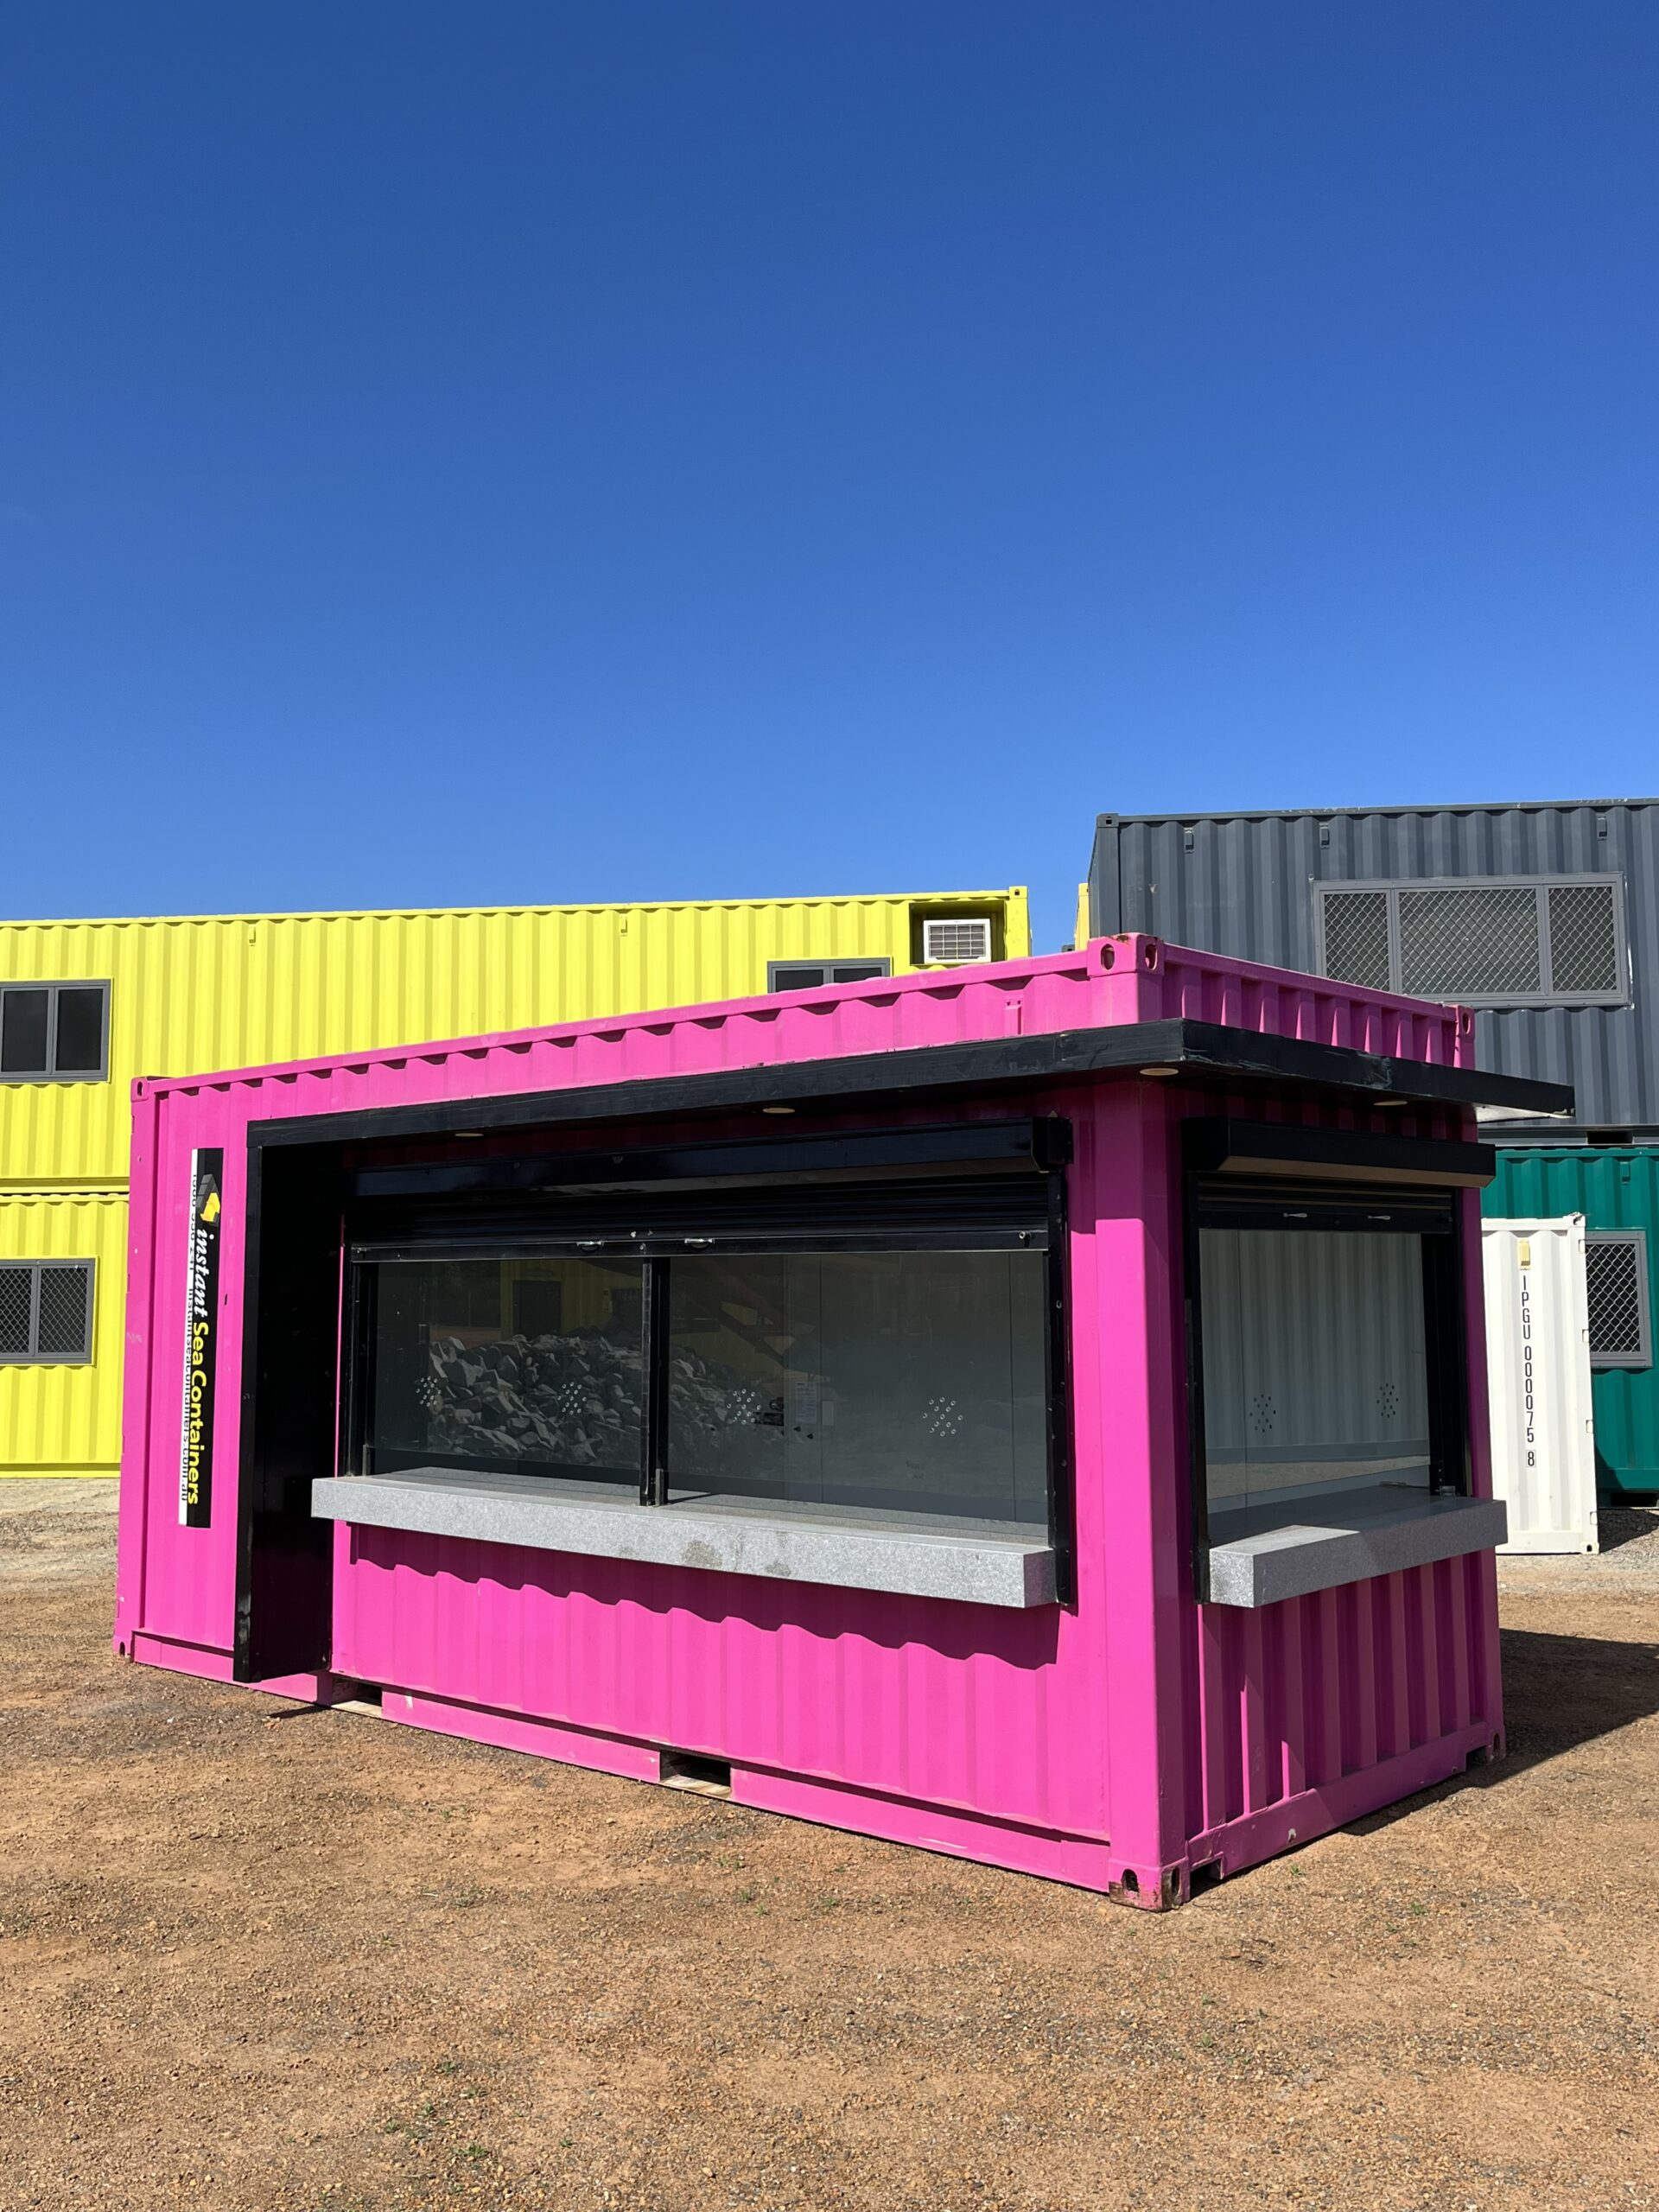 a brightly colored pink Shipping Container Box Office, modified to serve as a retail or food service outlet with large serving window